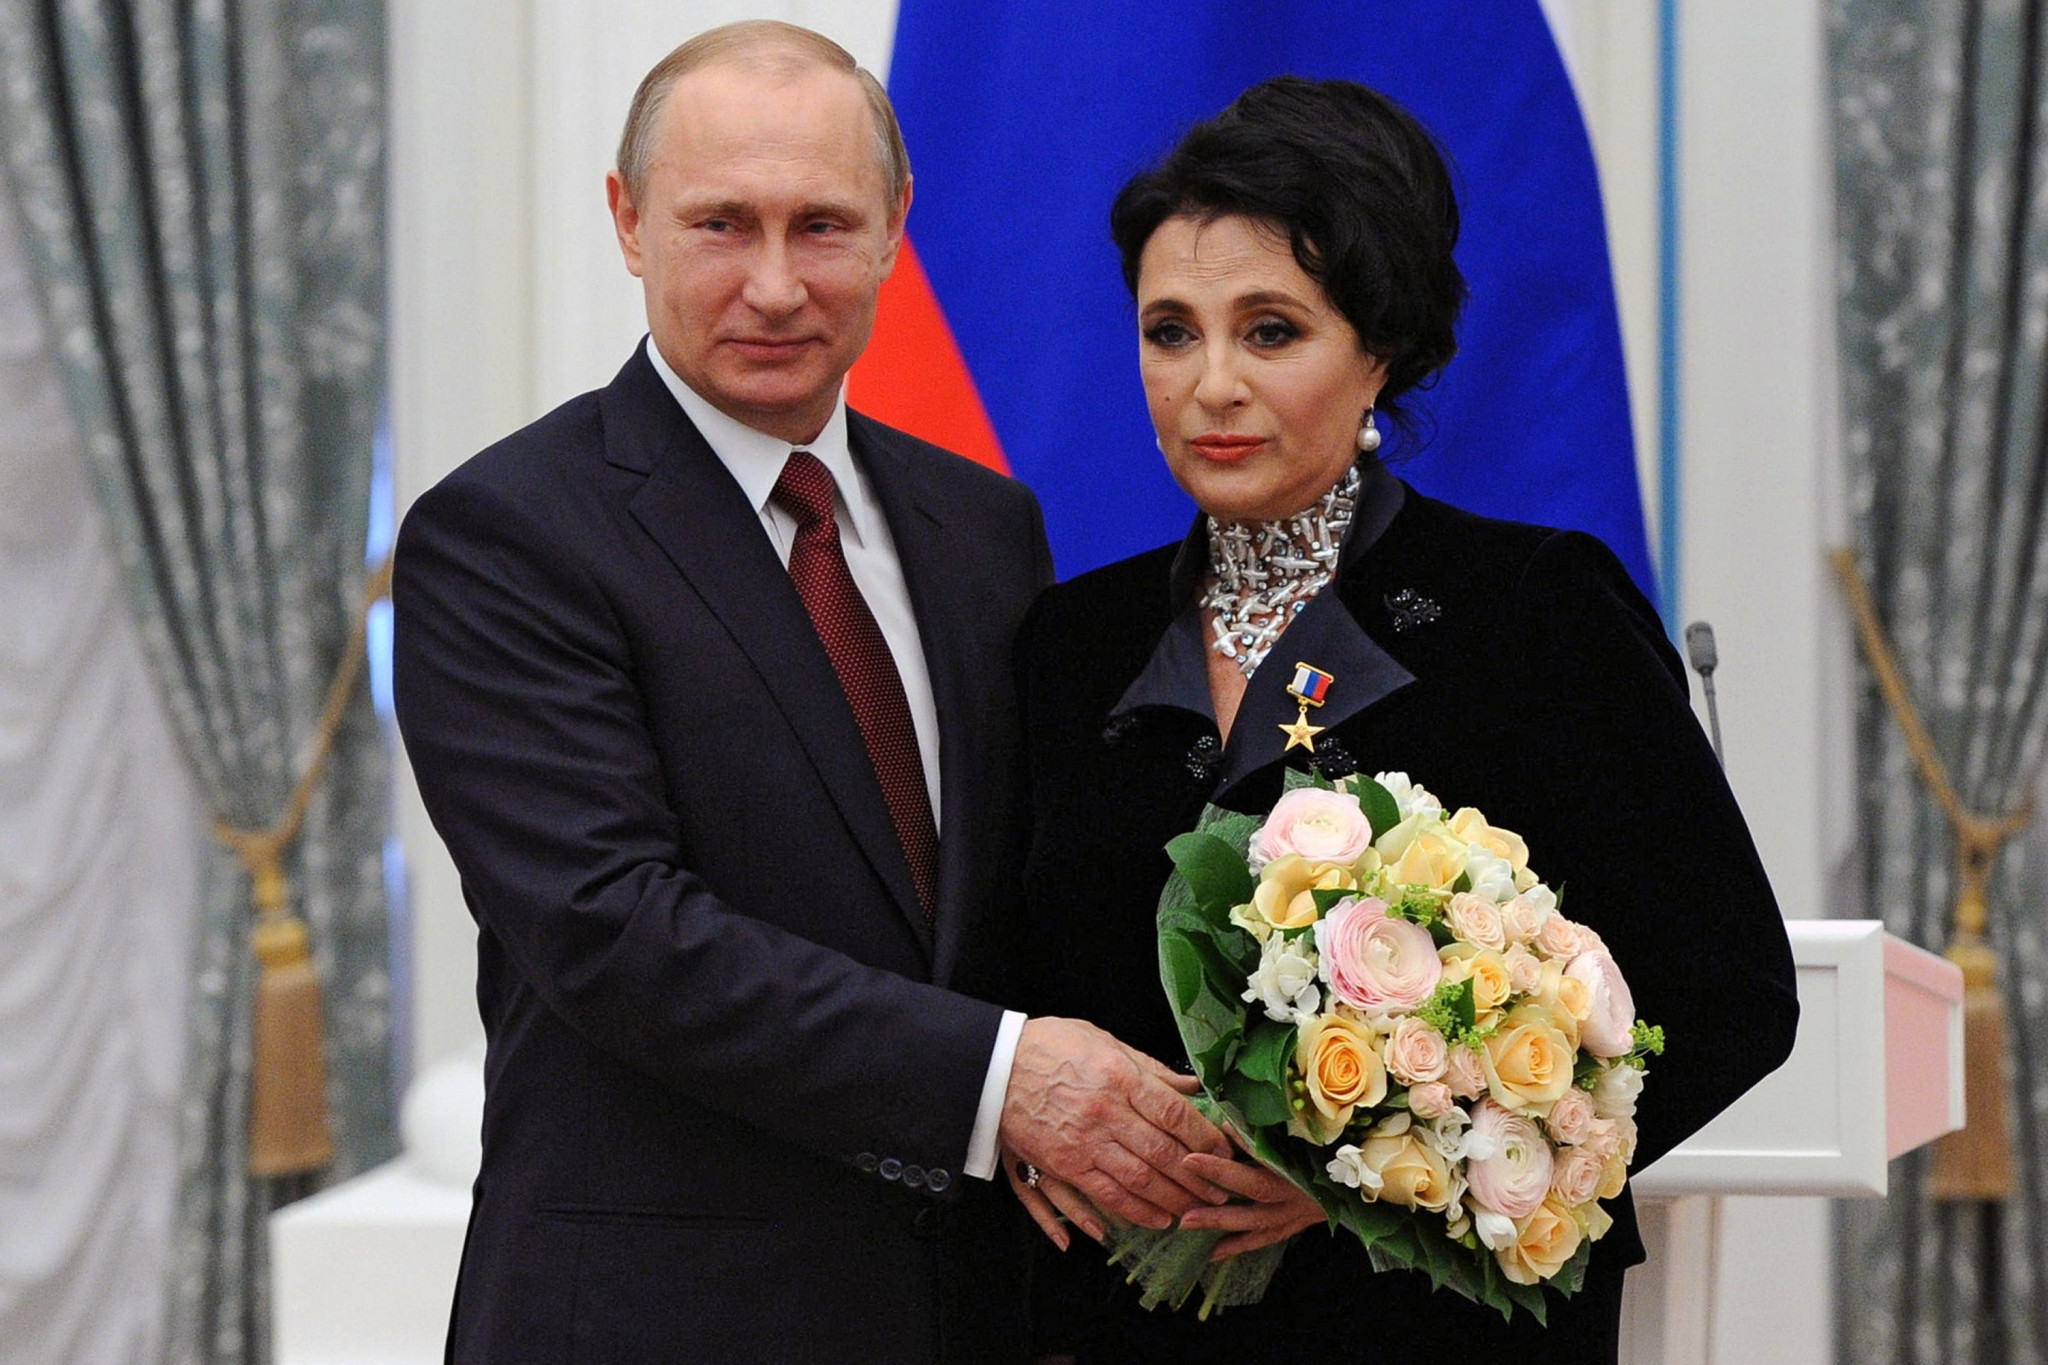 Russian Rhythmic Gymnastics Federation President Irina Viner, pictured next to the country's leader Vladimir Putin, claimed 